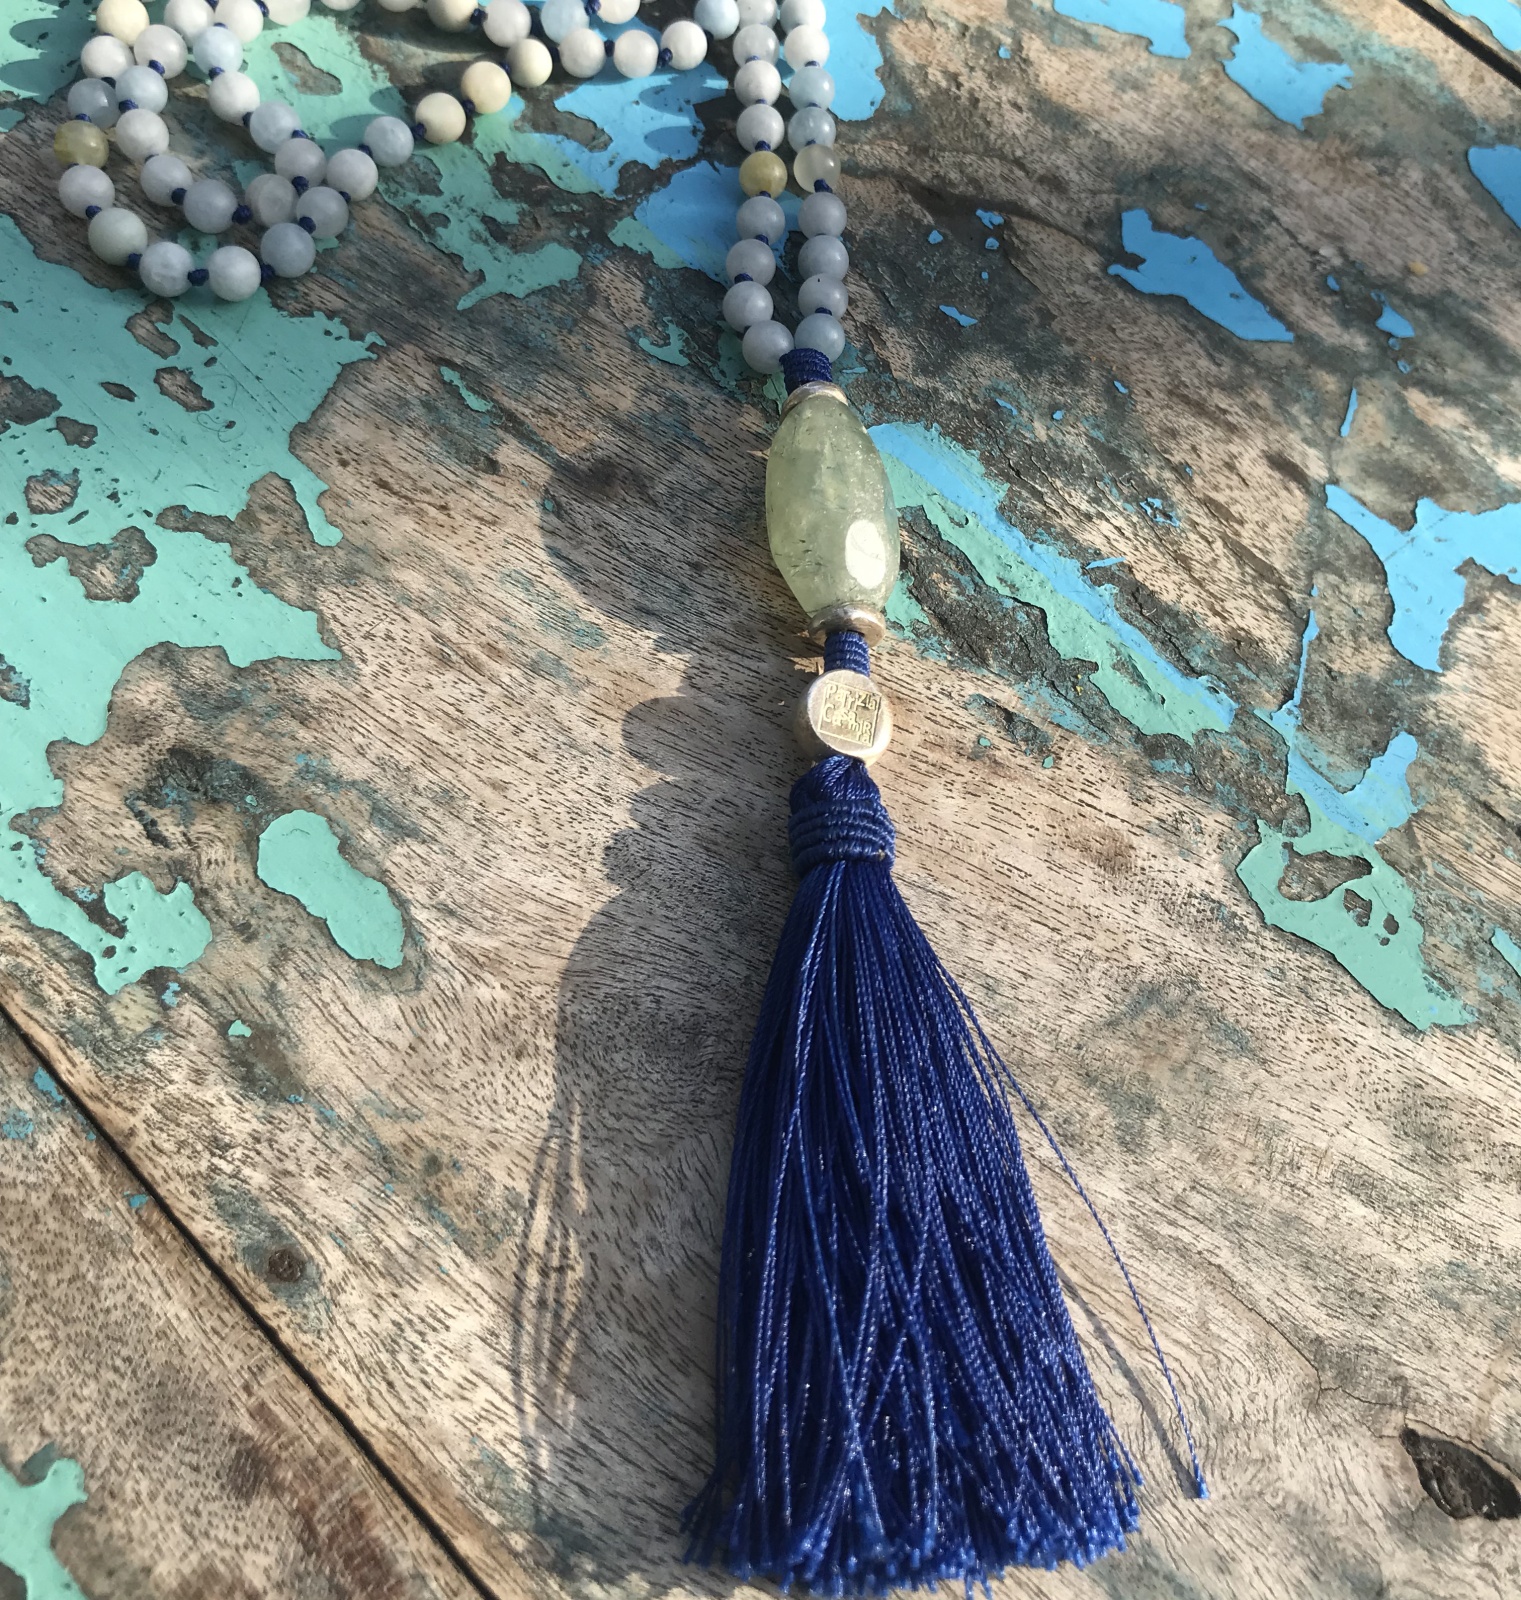 One of a Kind Mala - €169

Every piece is a one of a kind

Details

Matt Amhetyst
925 Sterling Silver
Length cm.77
High Polished Finish
Nickel-free
Handmade
Engraved with Patrizia Casamirra Jewels Logo